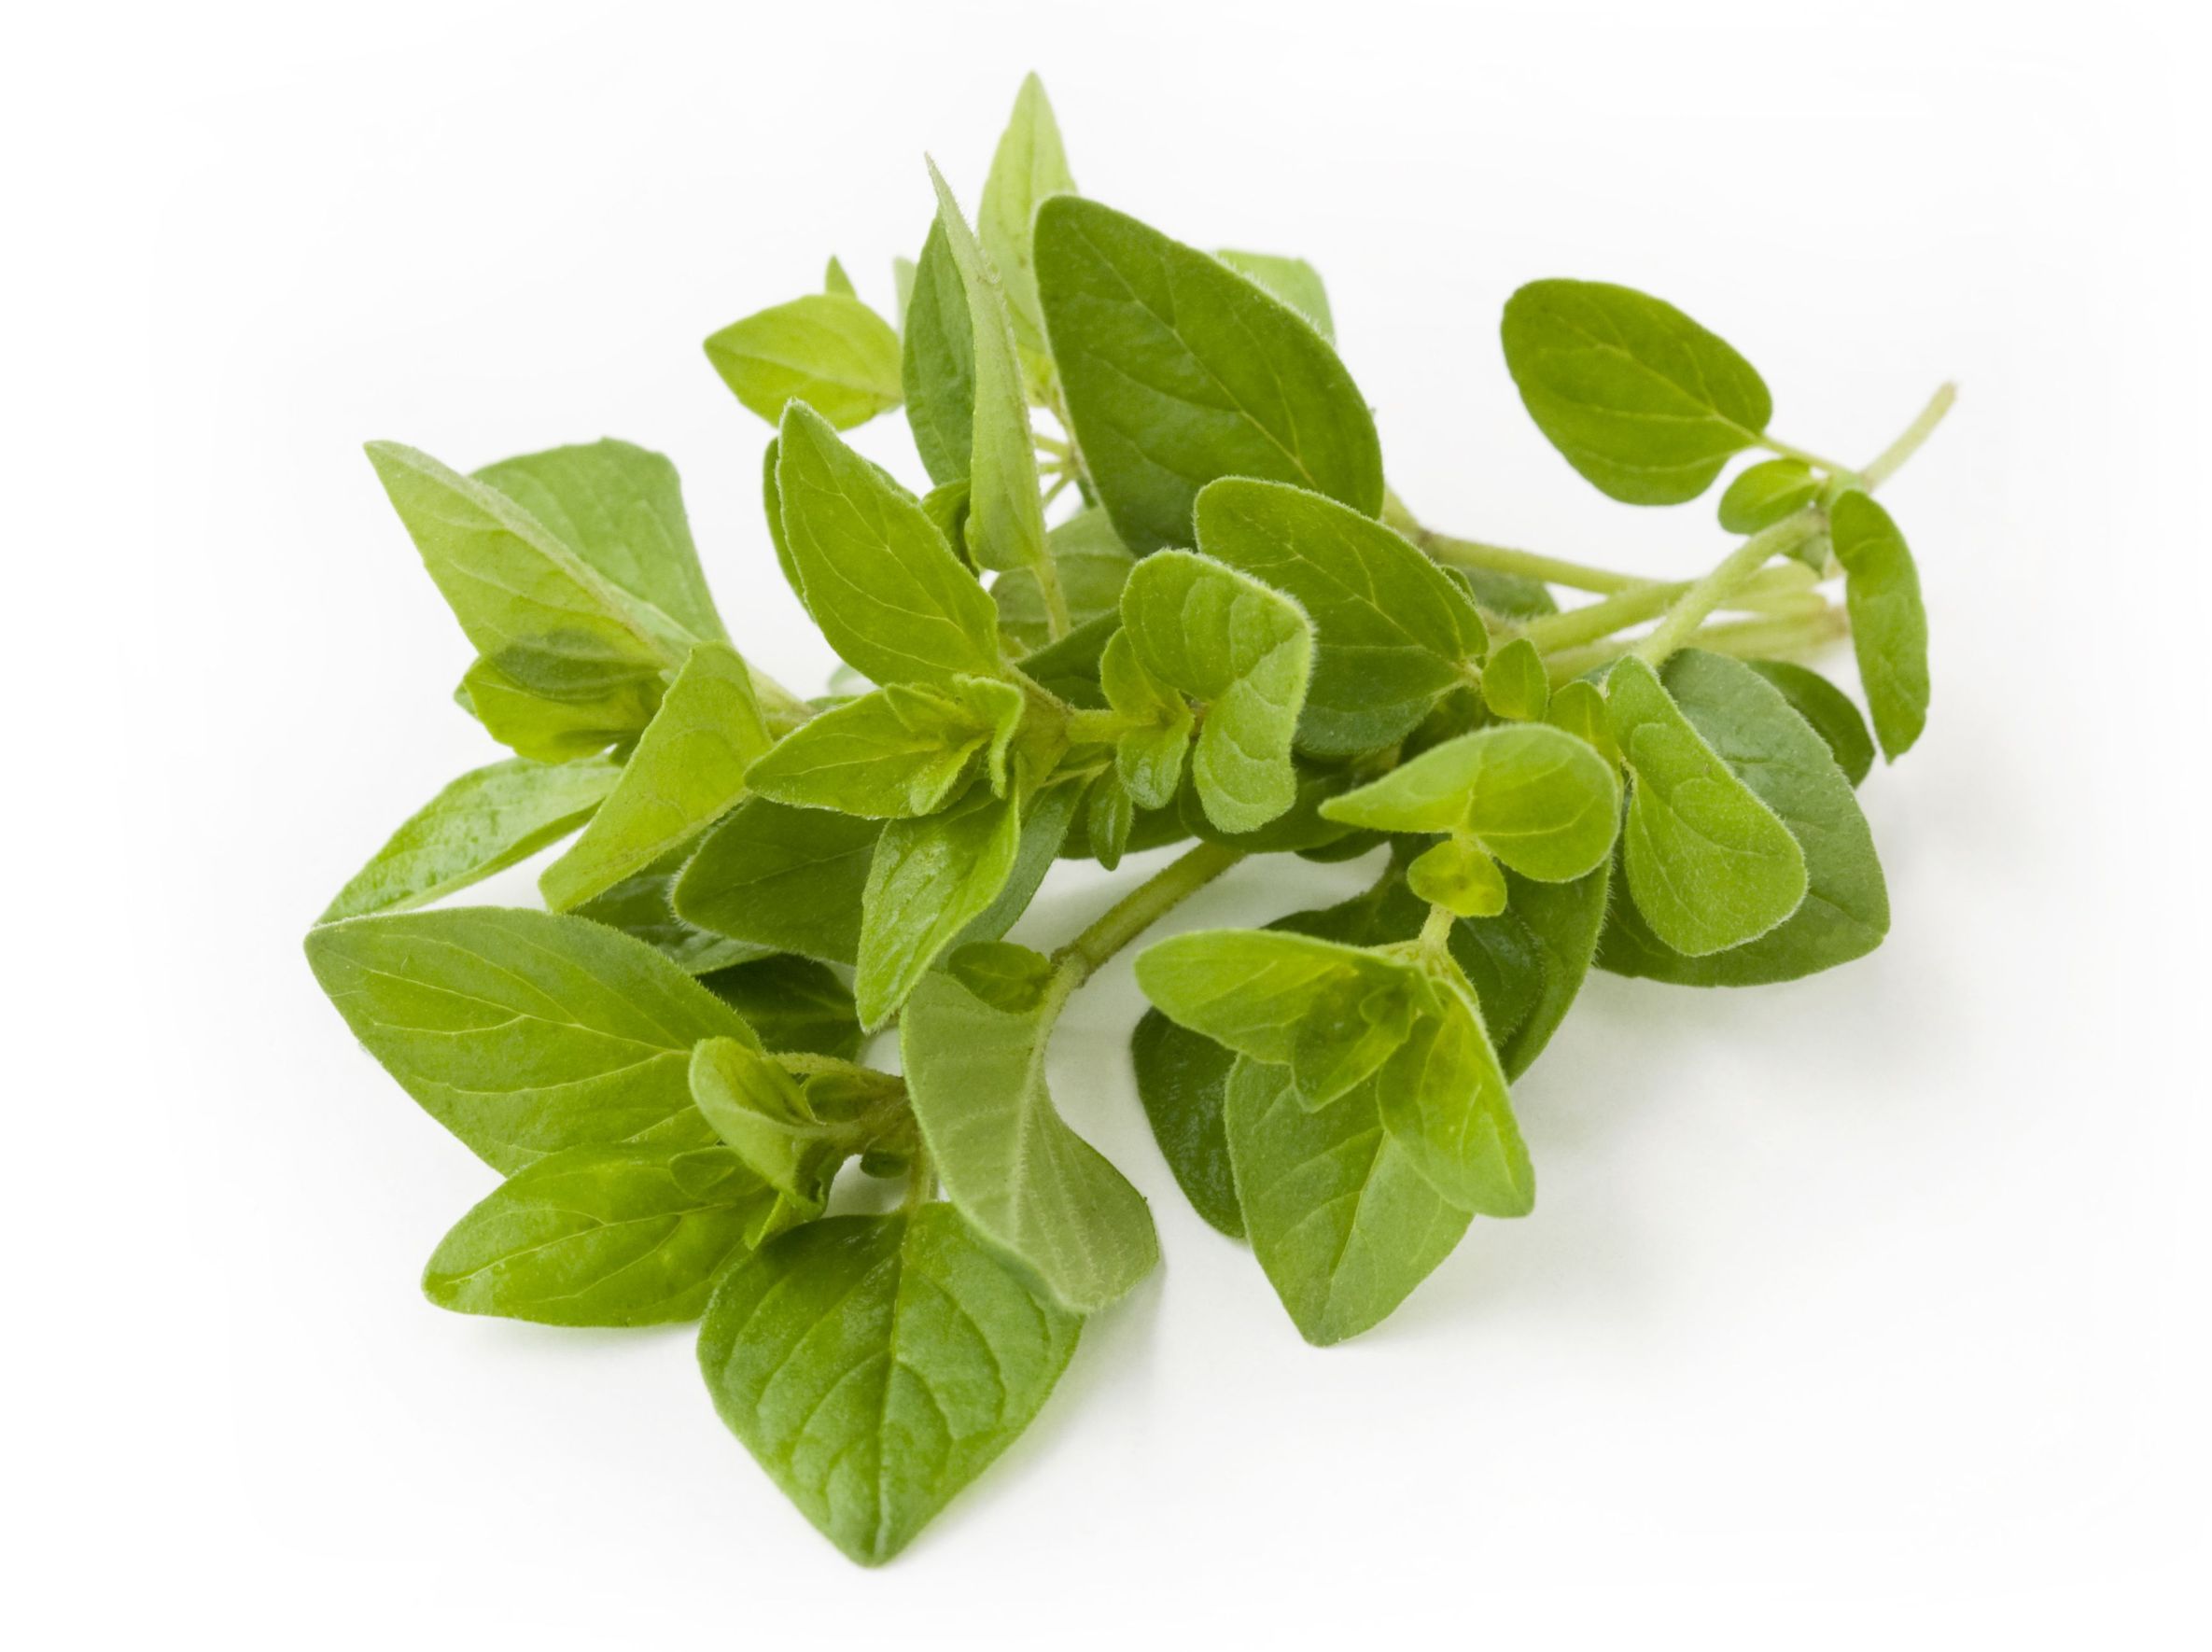 Oregano Essential Oil Uses and Benefits